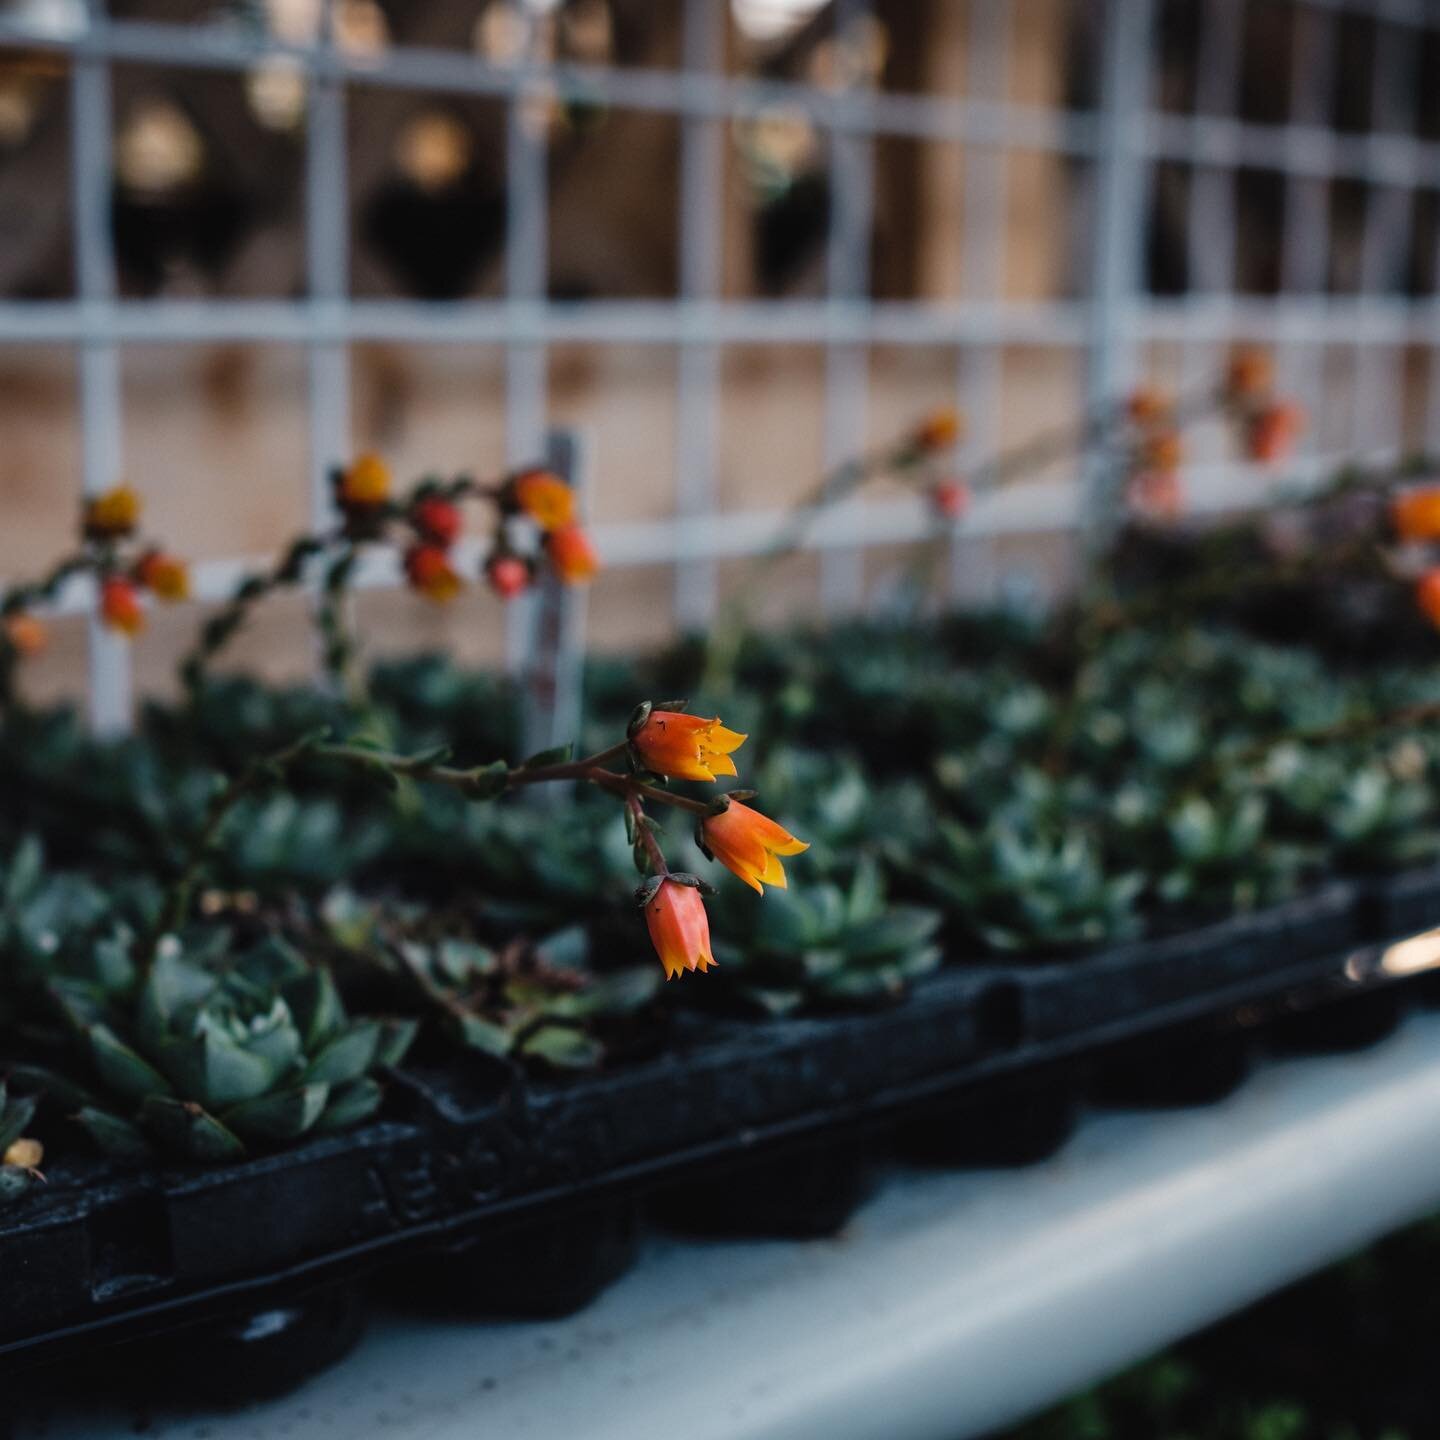 That feeling of Spring is officially here 🌿 And we know you growers are eager to stick your hands in soil. Check out these past Grow Guide episodes to help with your garden planning:

S2E86: Why Buy Certified Organic Seeds
S2E69: Succession Planting